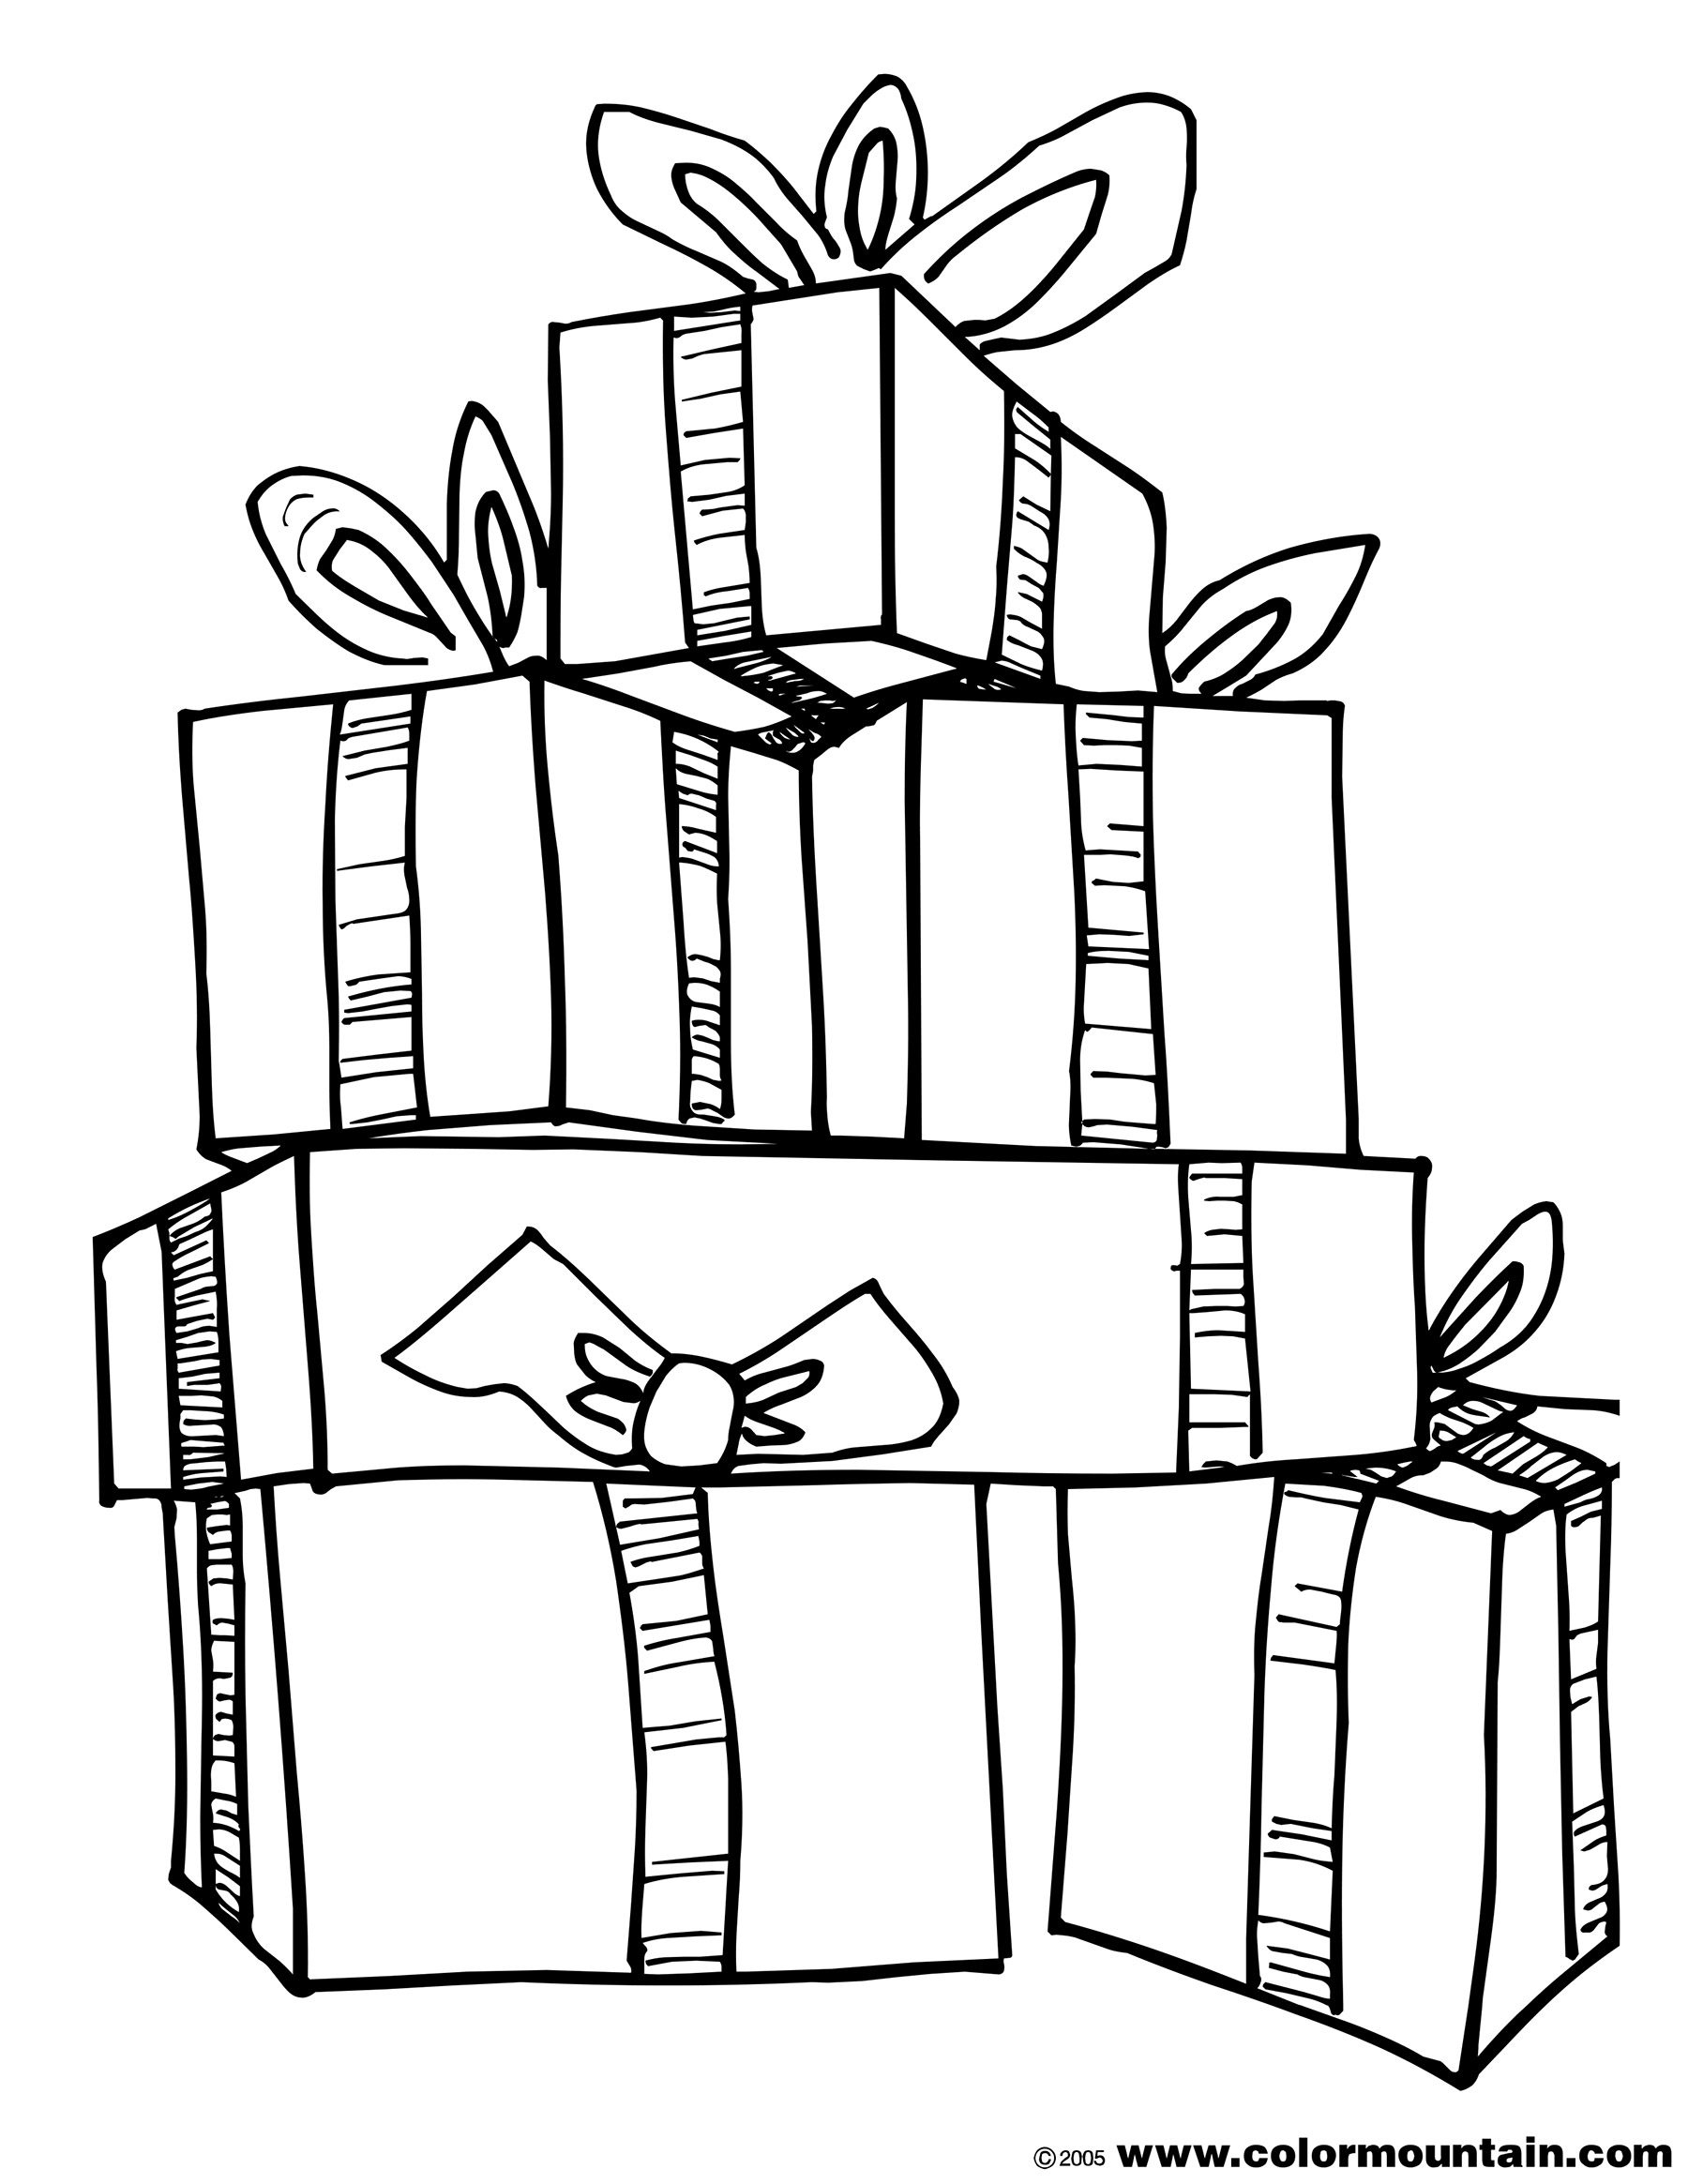 Christmas Present Coloring Pages For Kids at GetDrawings | Free download